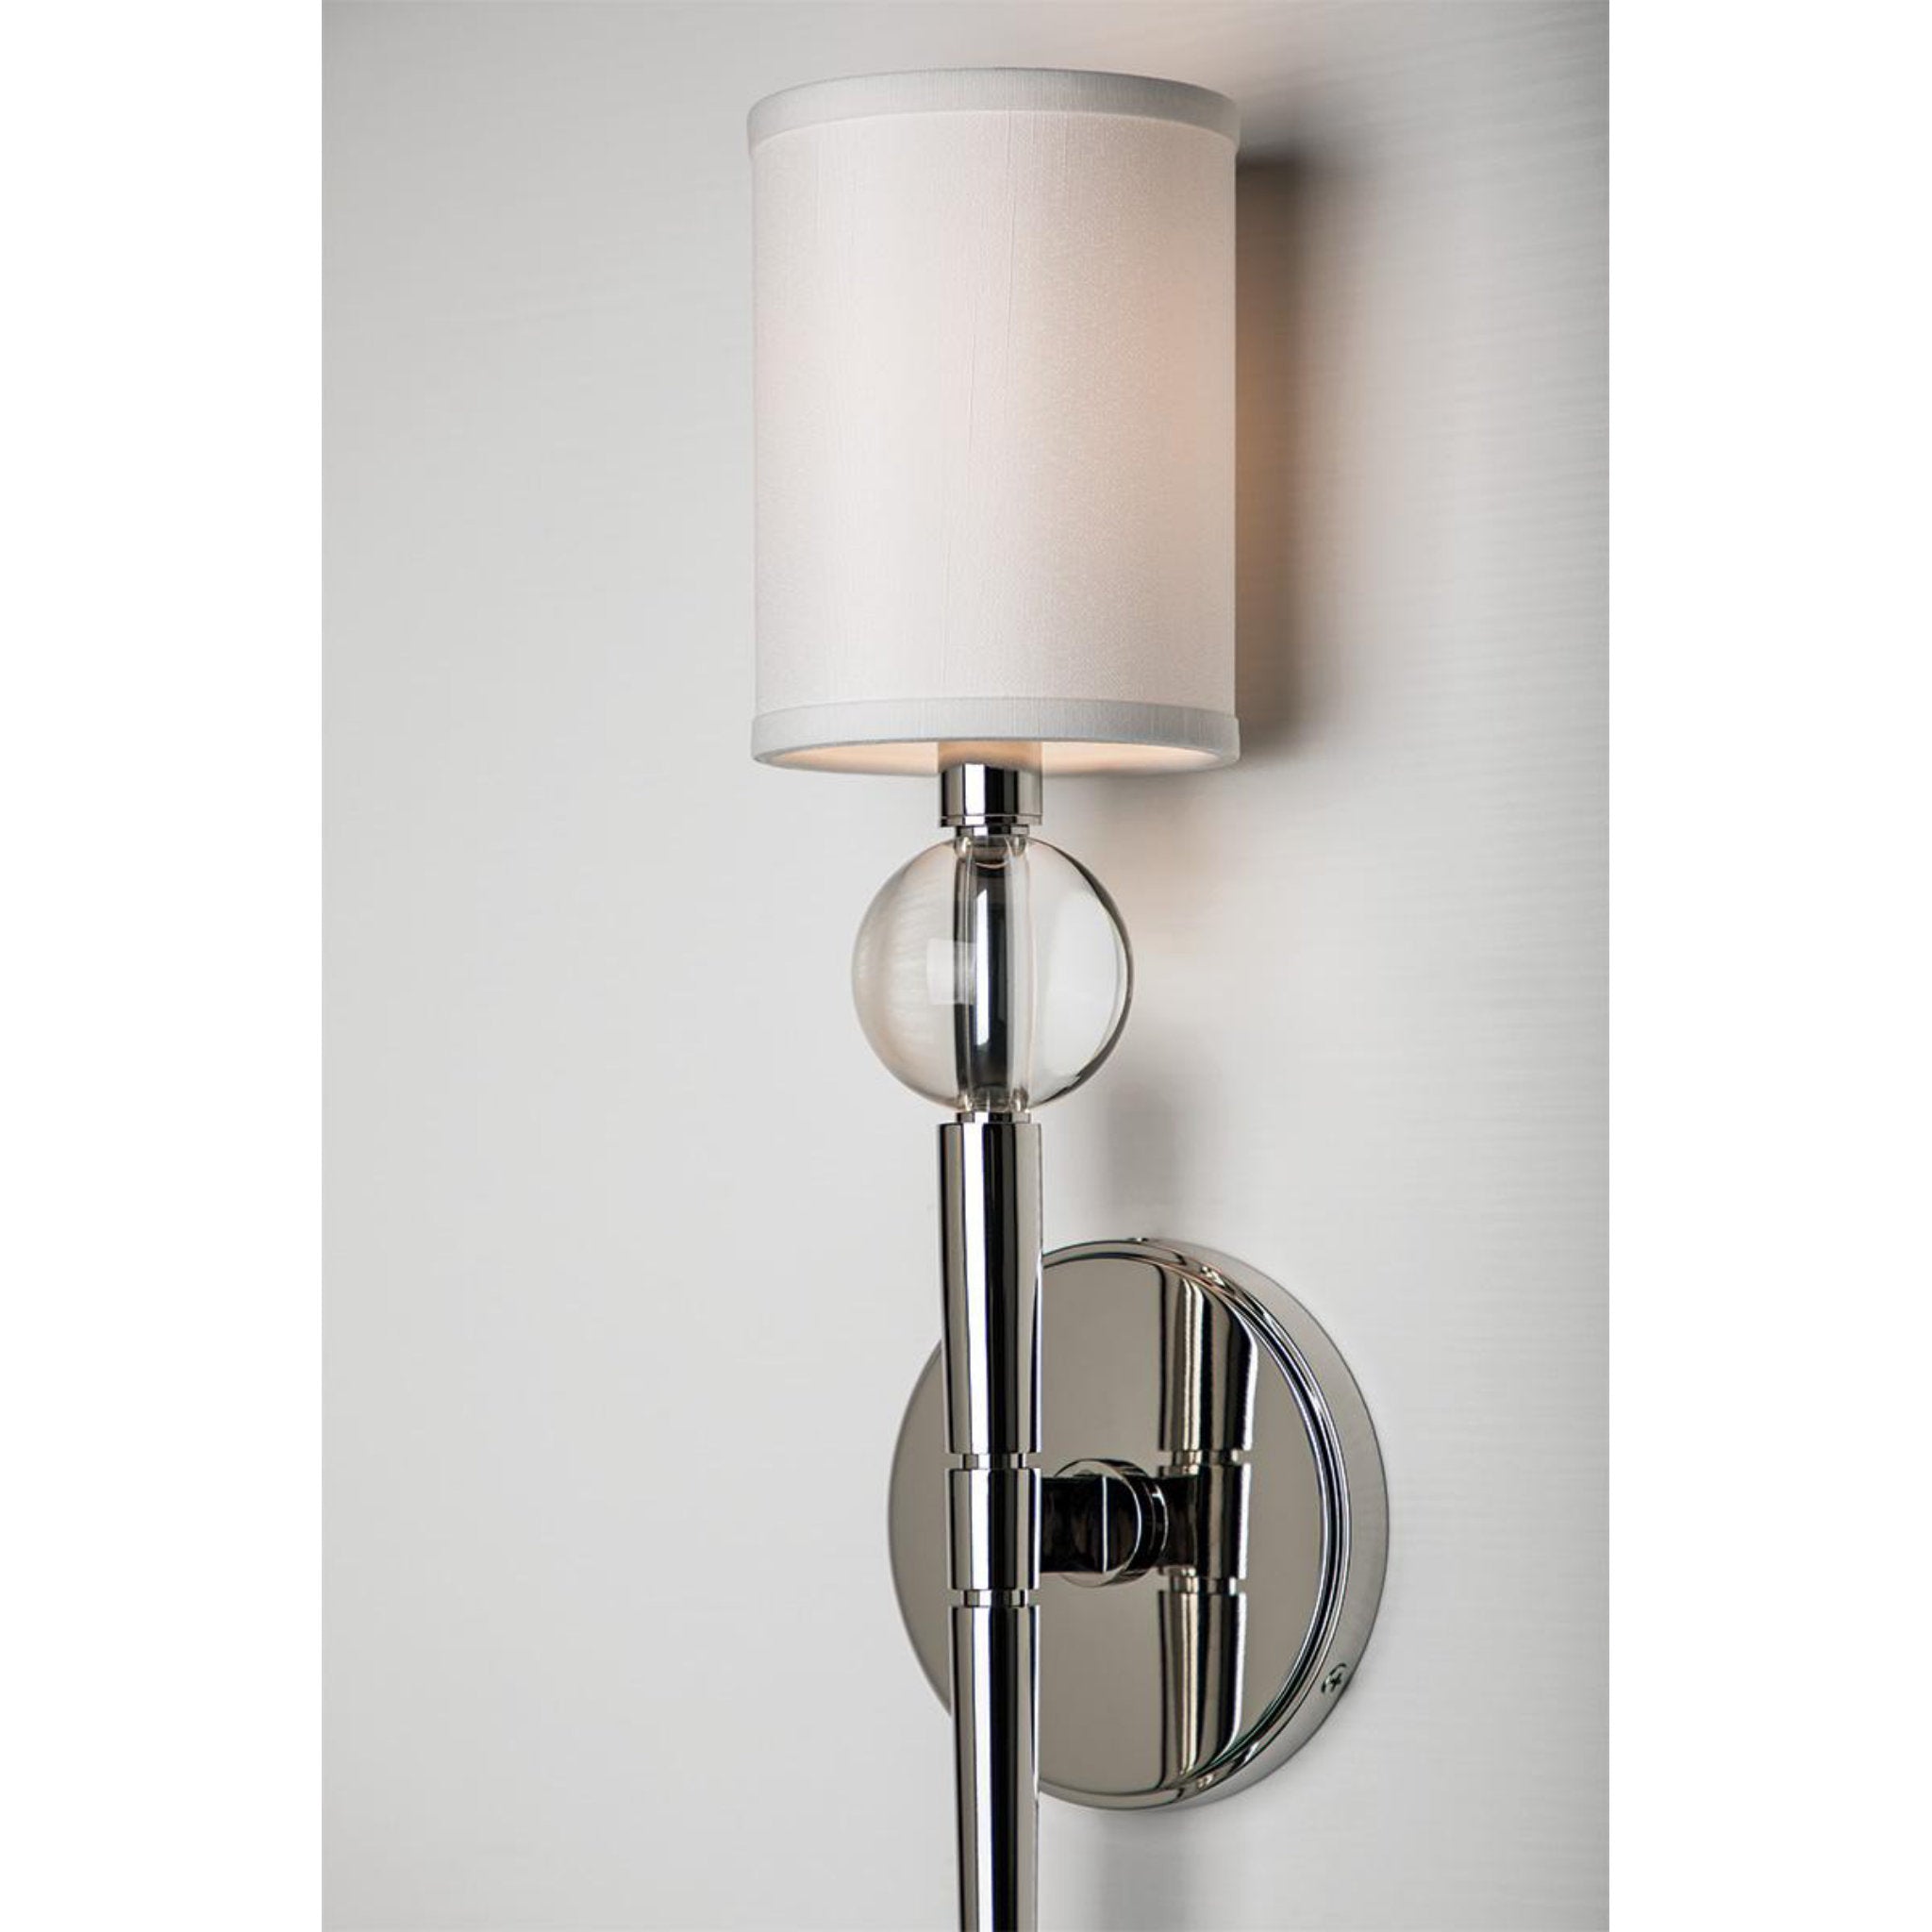 Rockland 1 Light Wall Sconce in Aged Brass